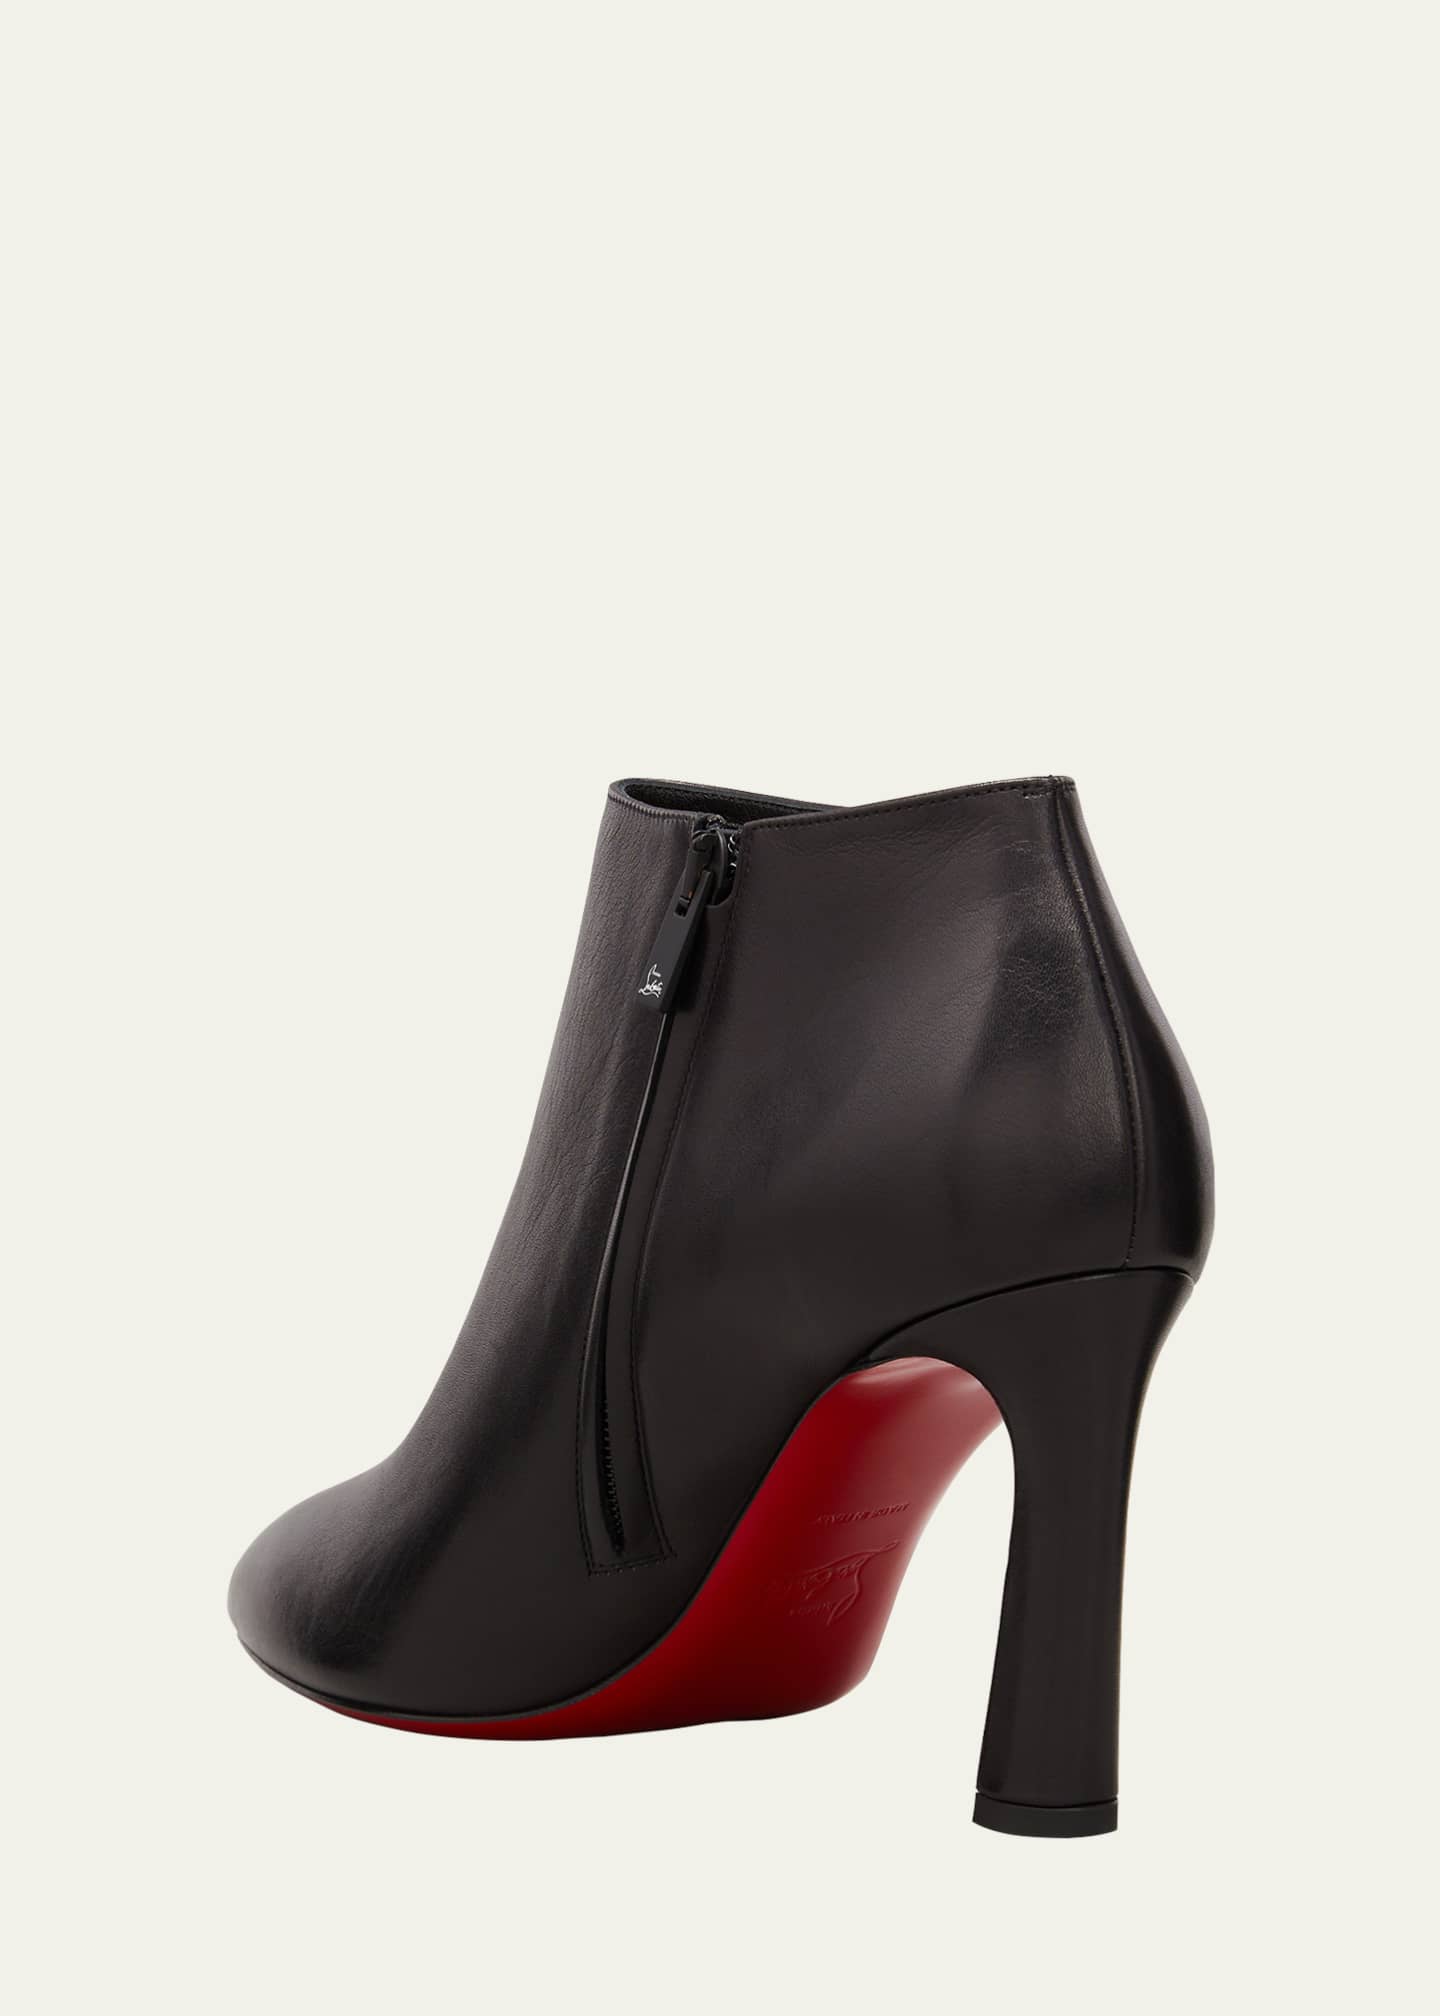 Christian Louboutin Belle Leather Red-Sole Ankle Boots - Bergdorf Goodman